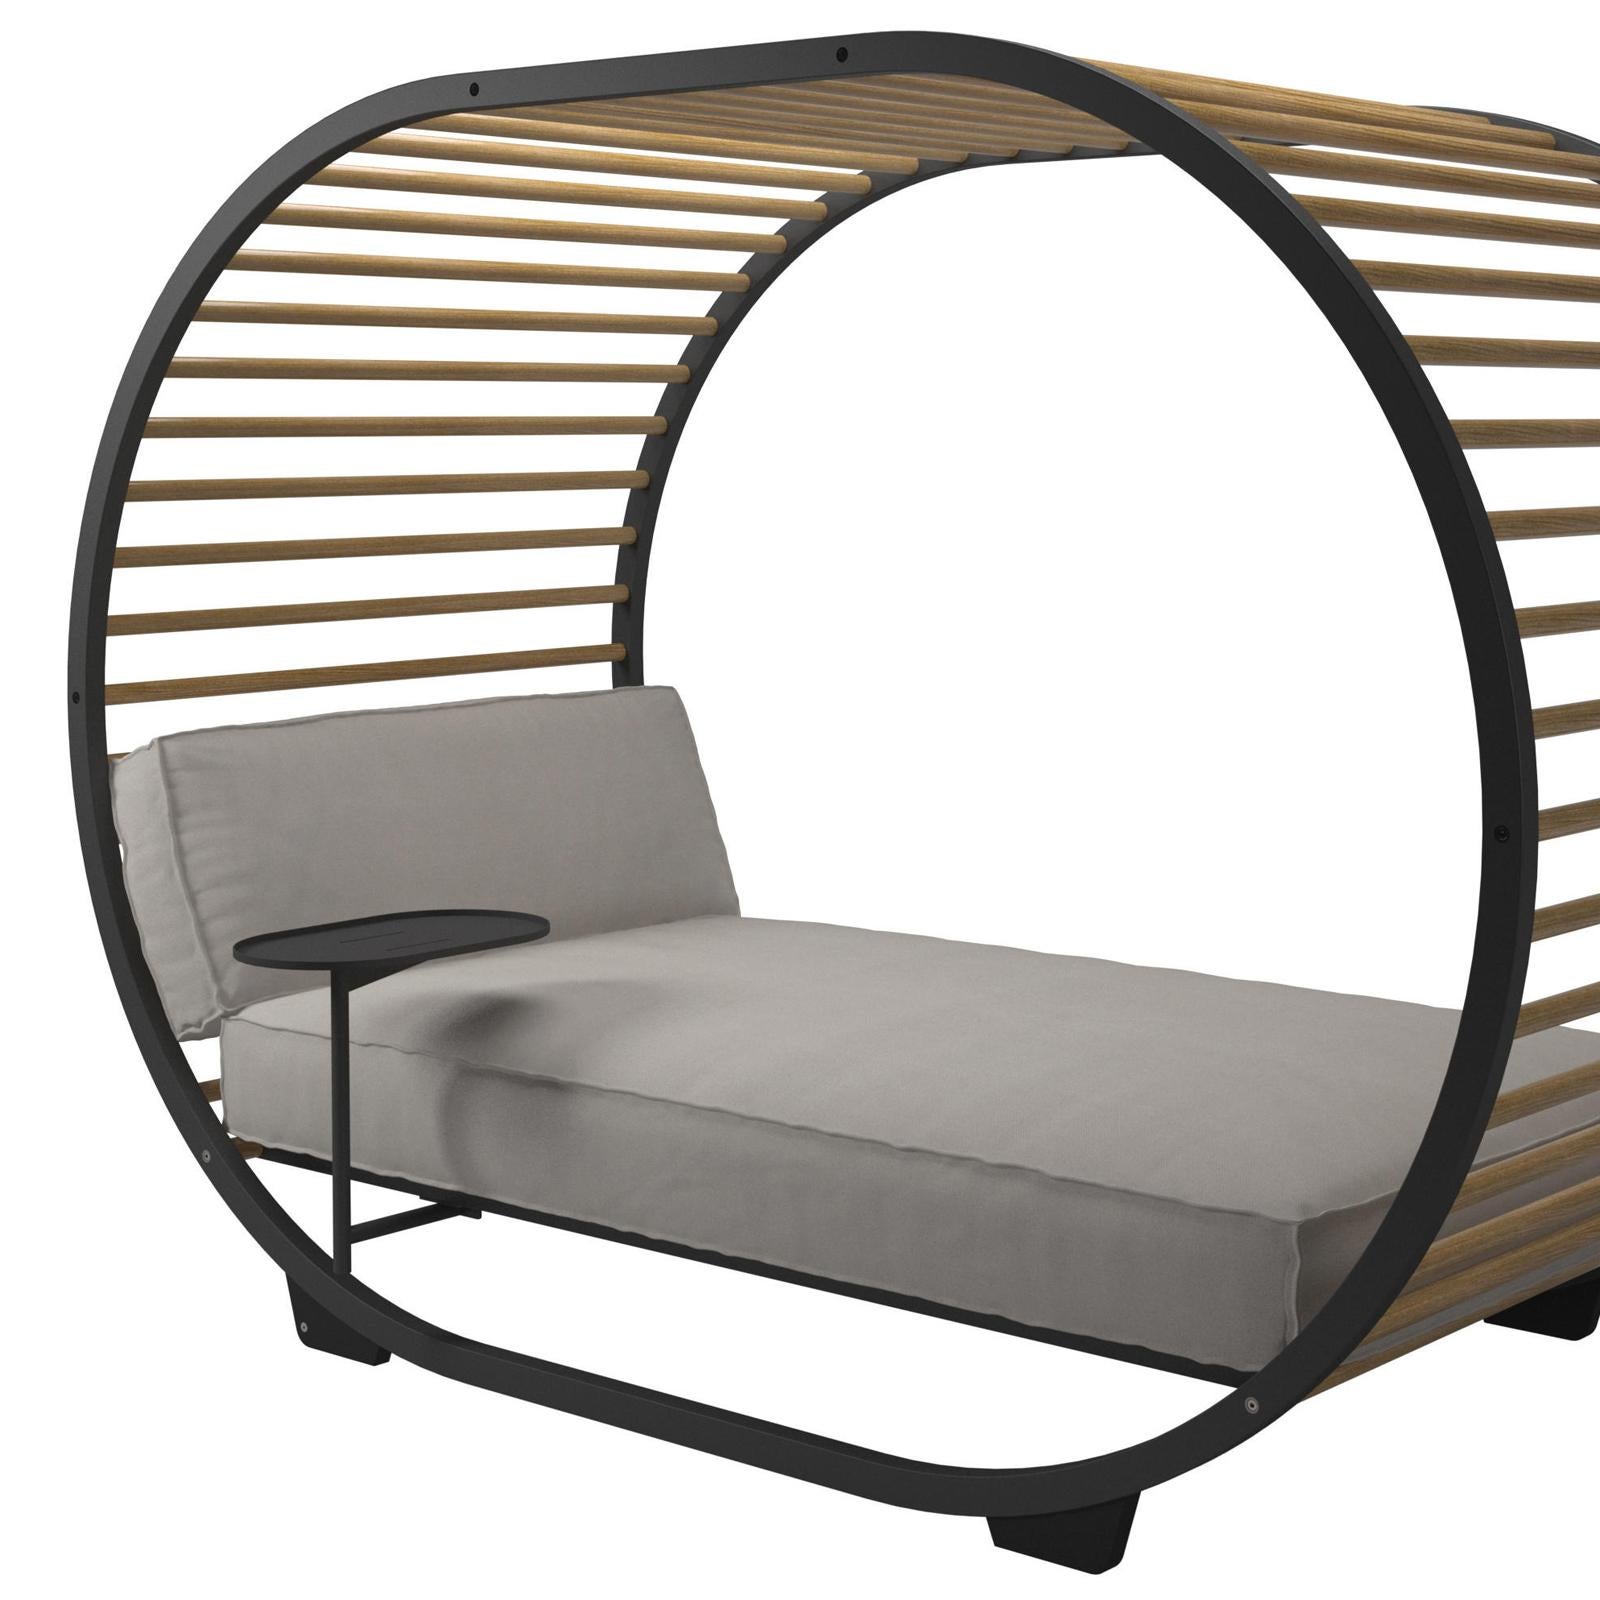 Daybed nest outdoor with structure in anthracite
powder coated aluminum. Frame with teak sticks
in buffed finish. Seat and back cushions included and
covers for protective seat and back included. Side
table included too. Seat and back water